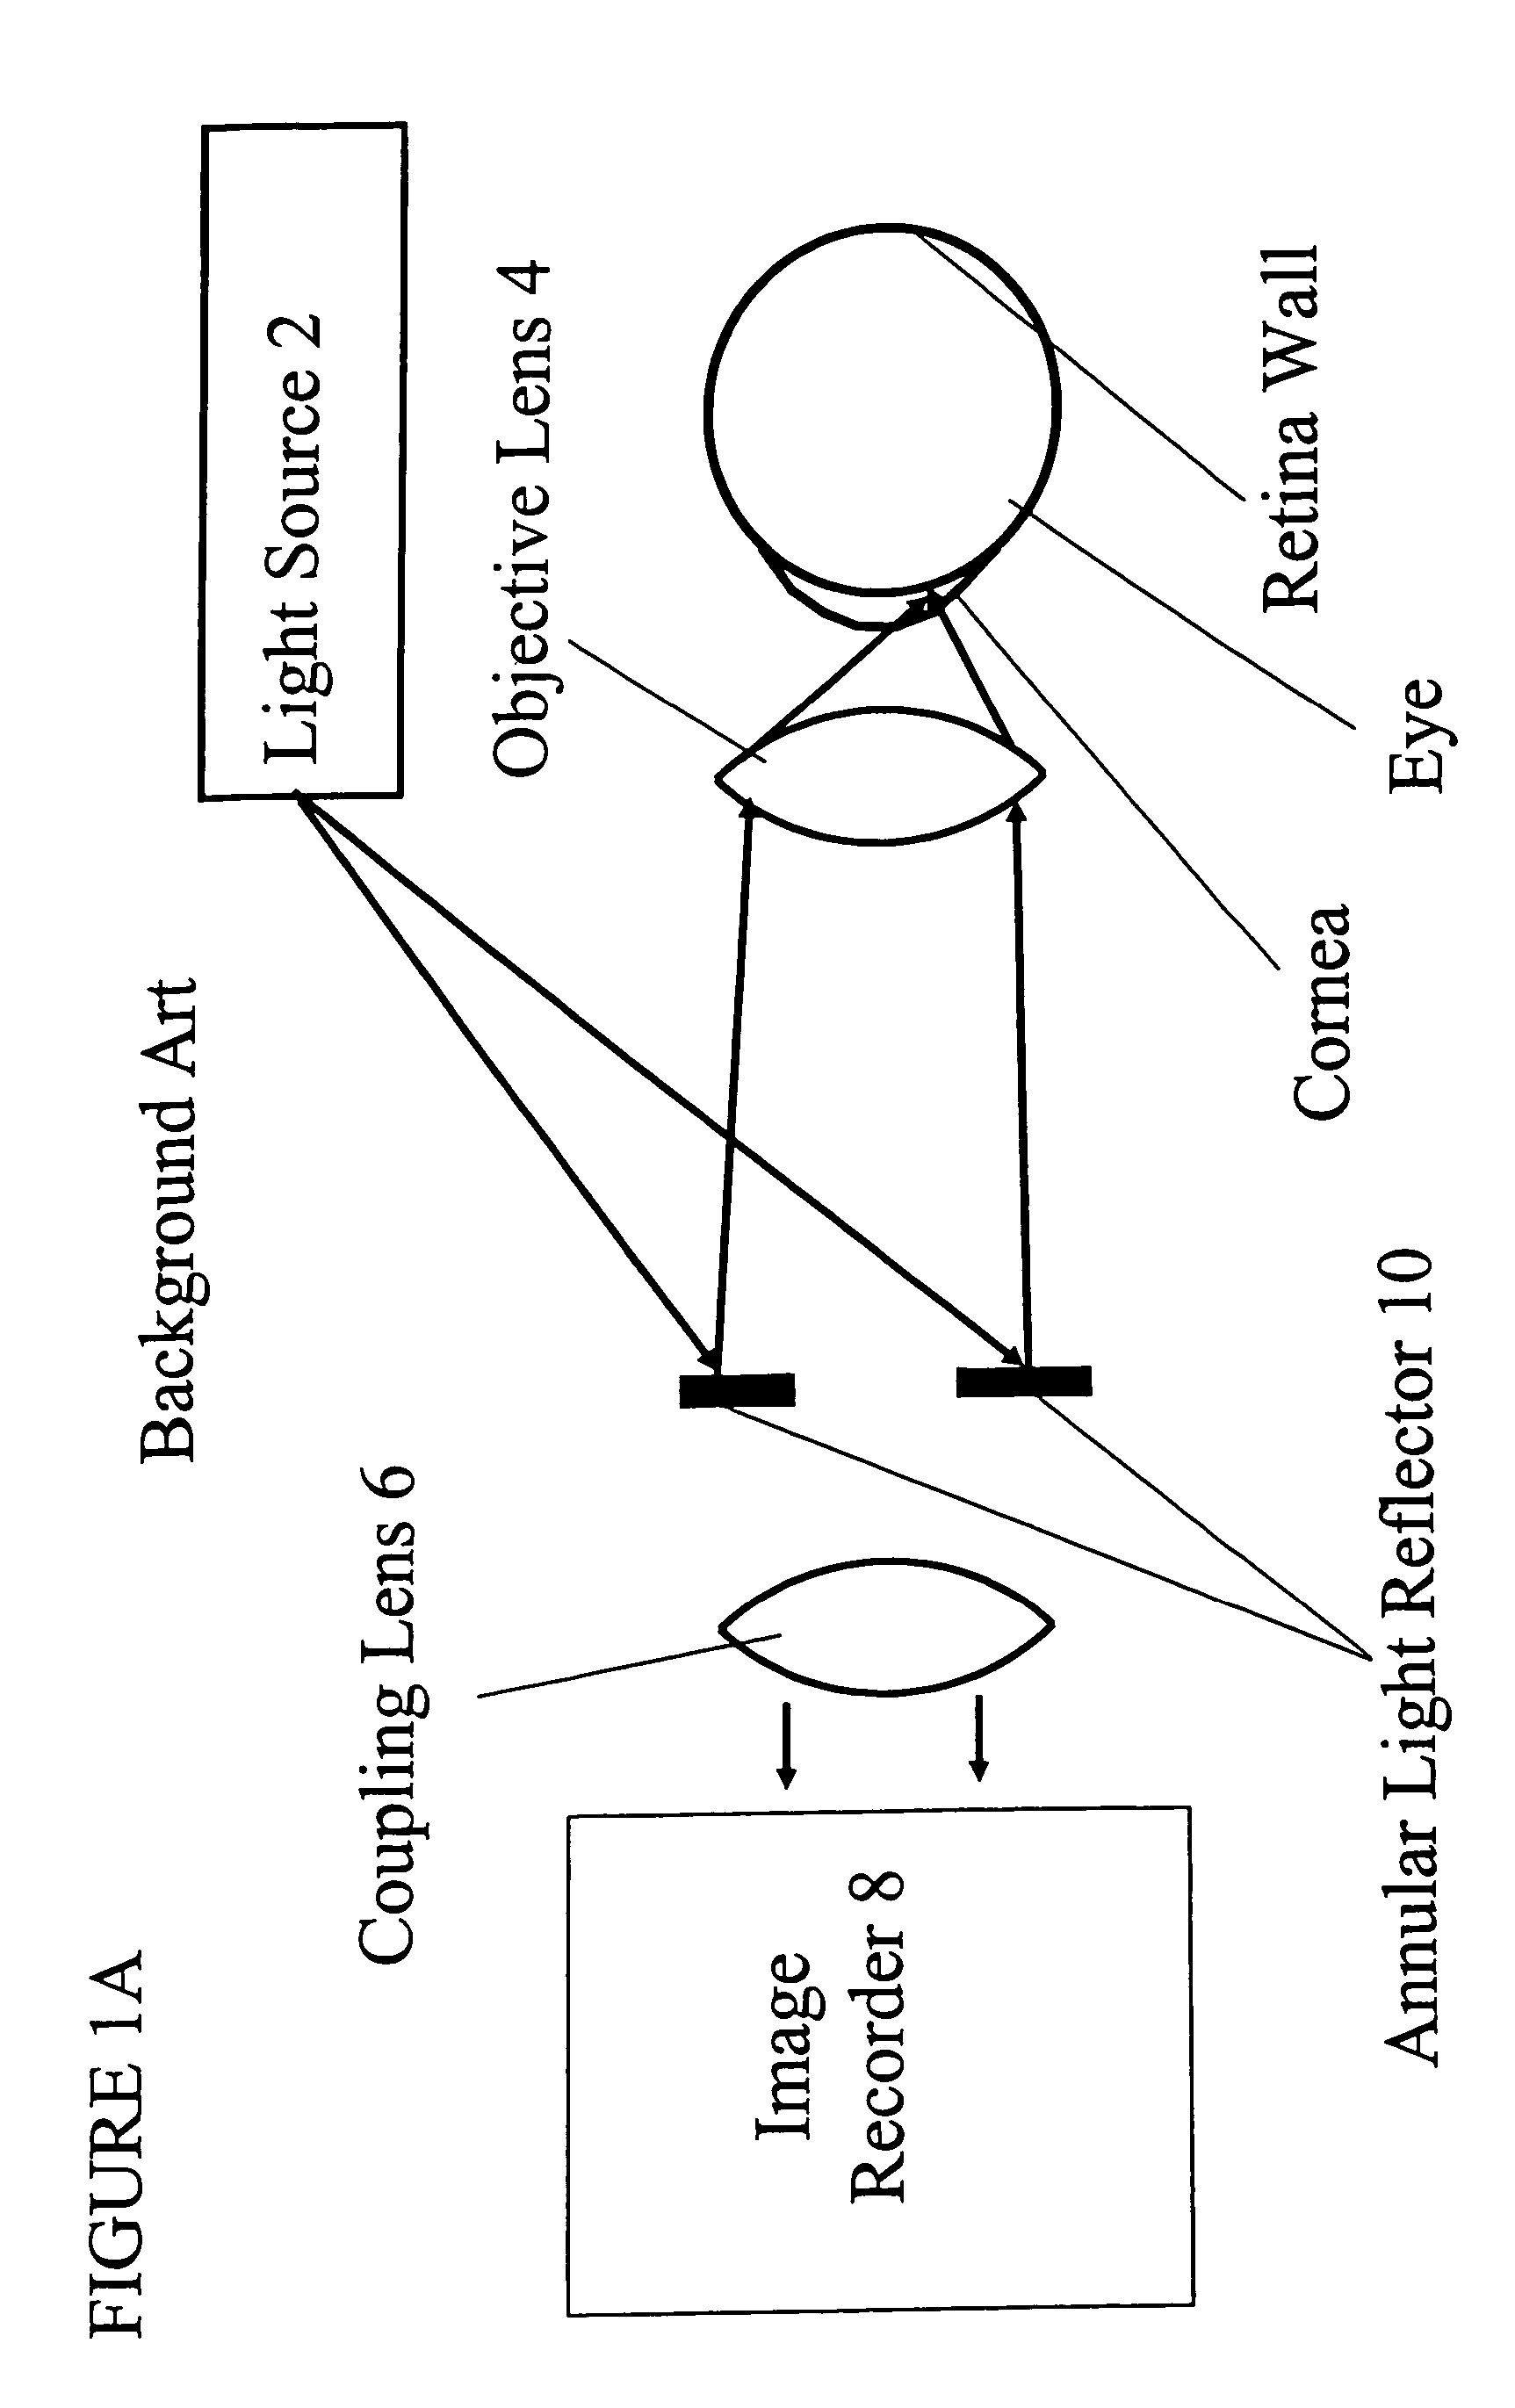 Imaging lens and illumination system